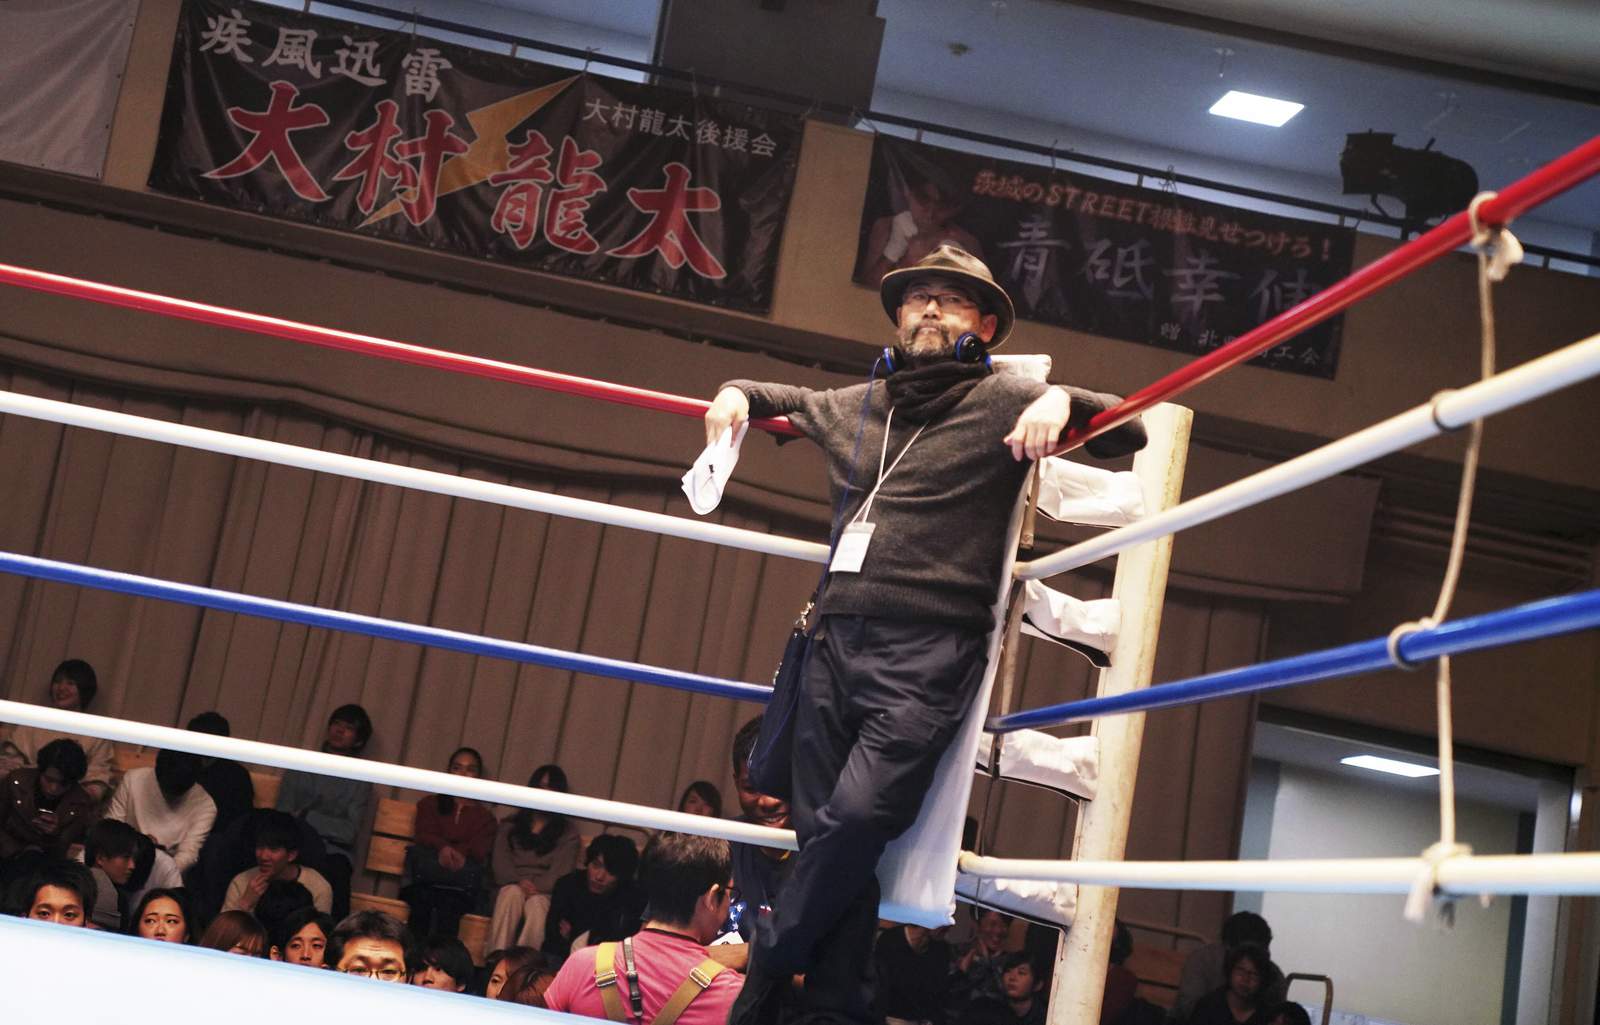 Tokyo festival opens with grueling boxing 'Underdog' film